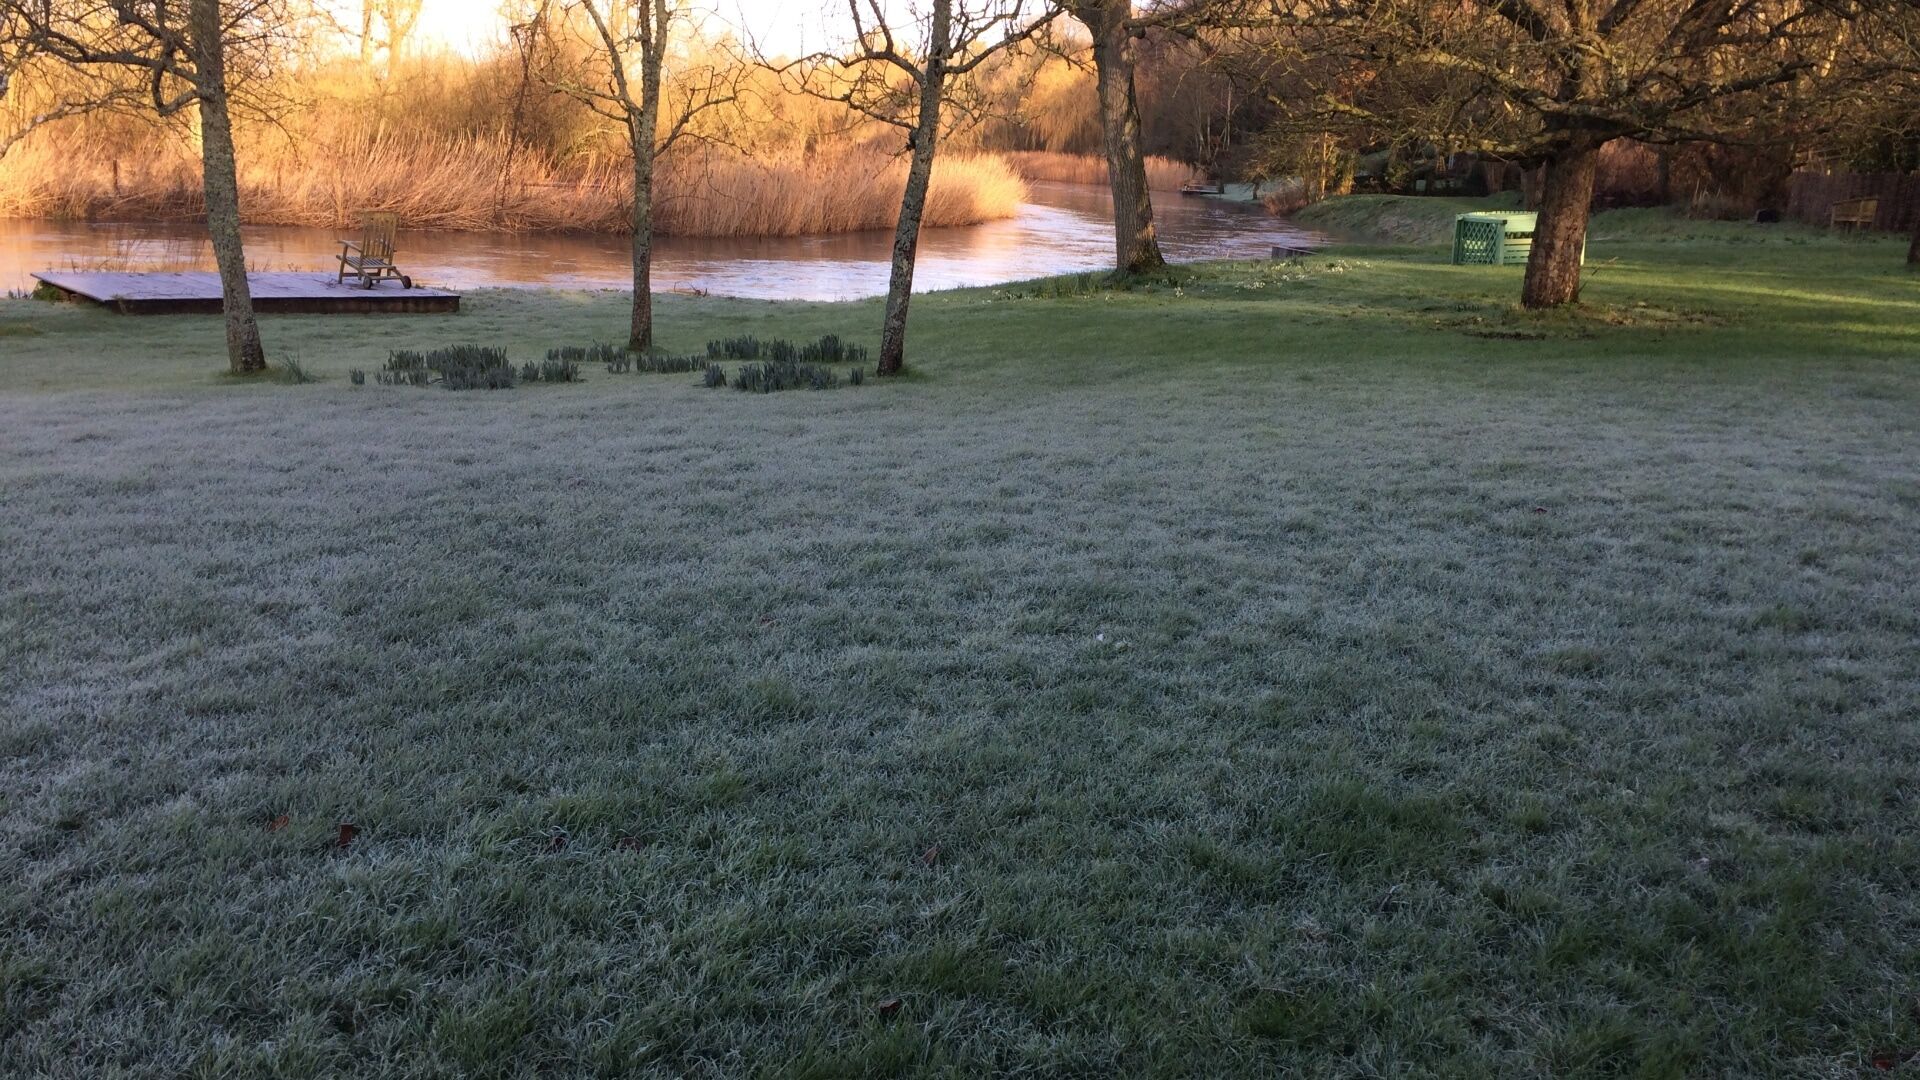 Frost covering lawn next to river